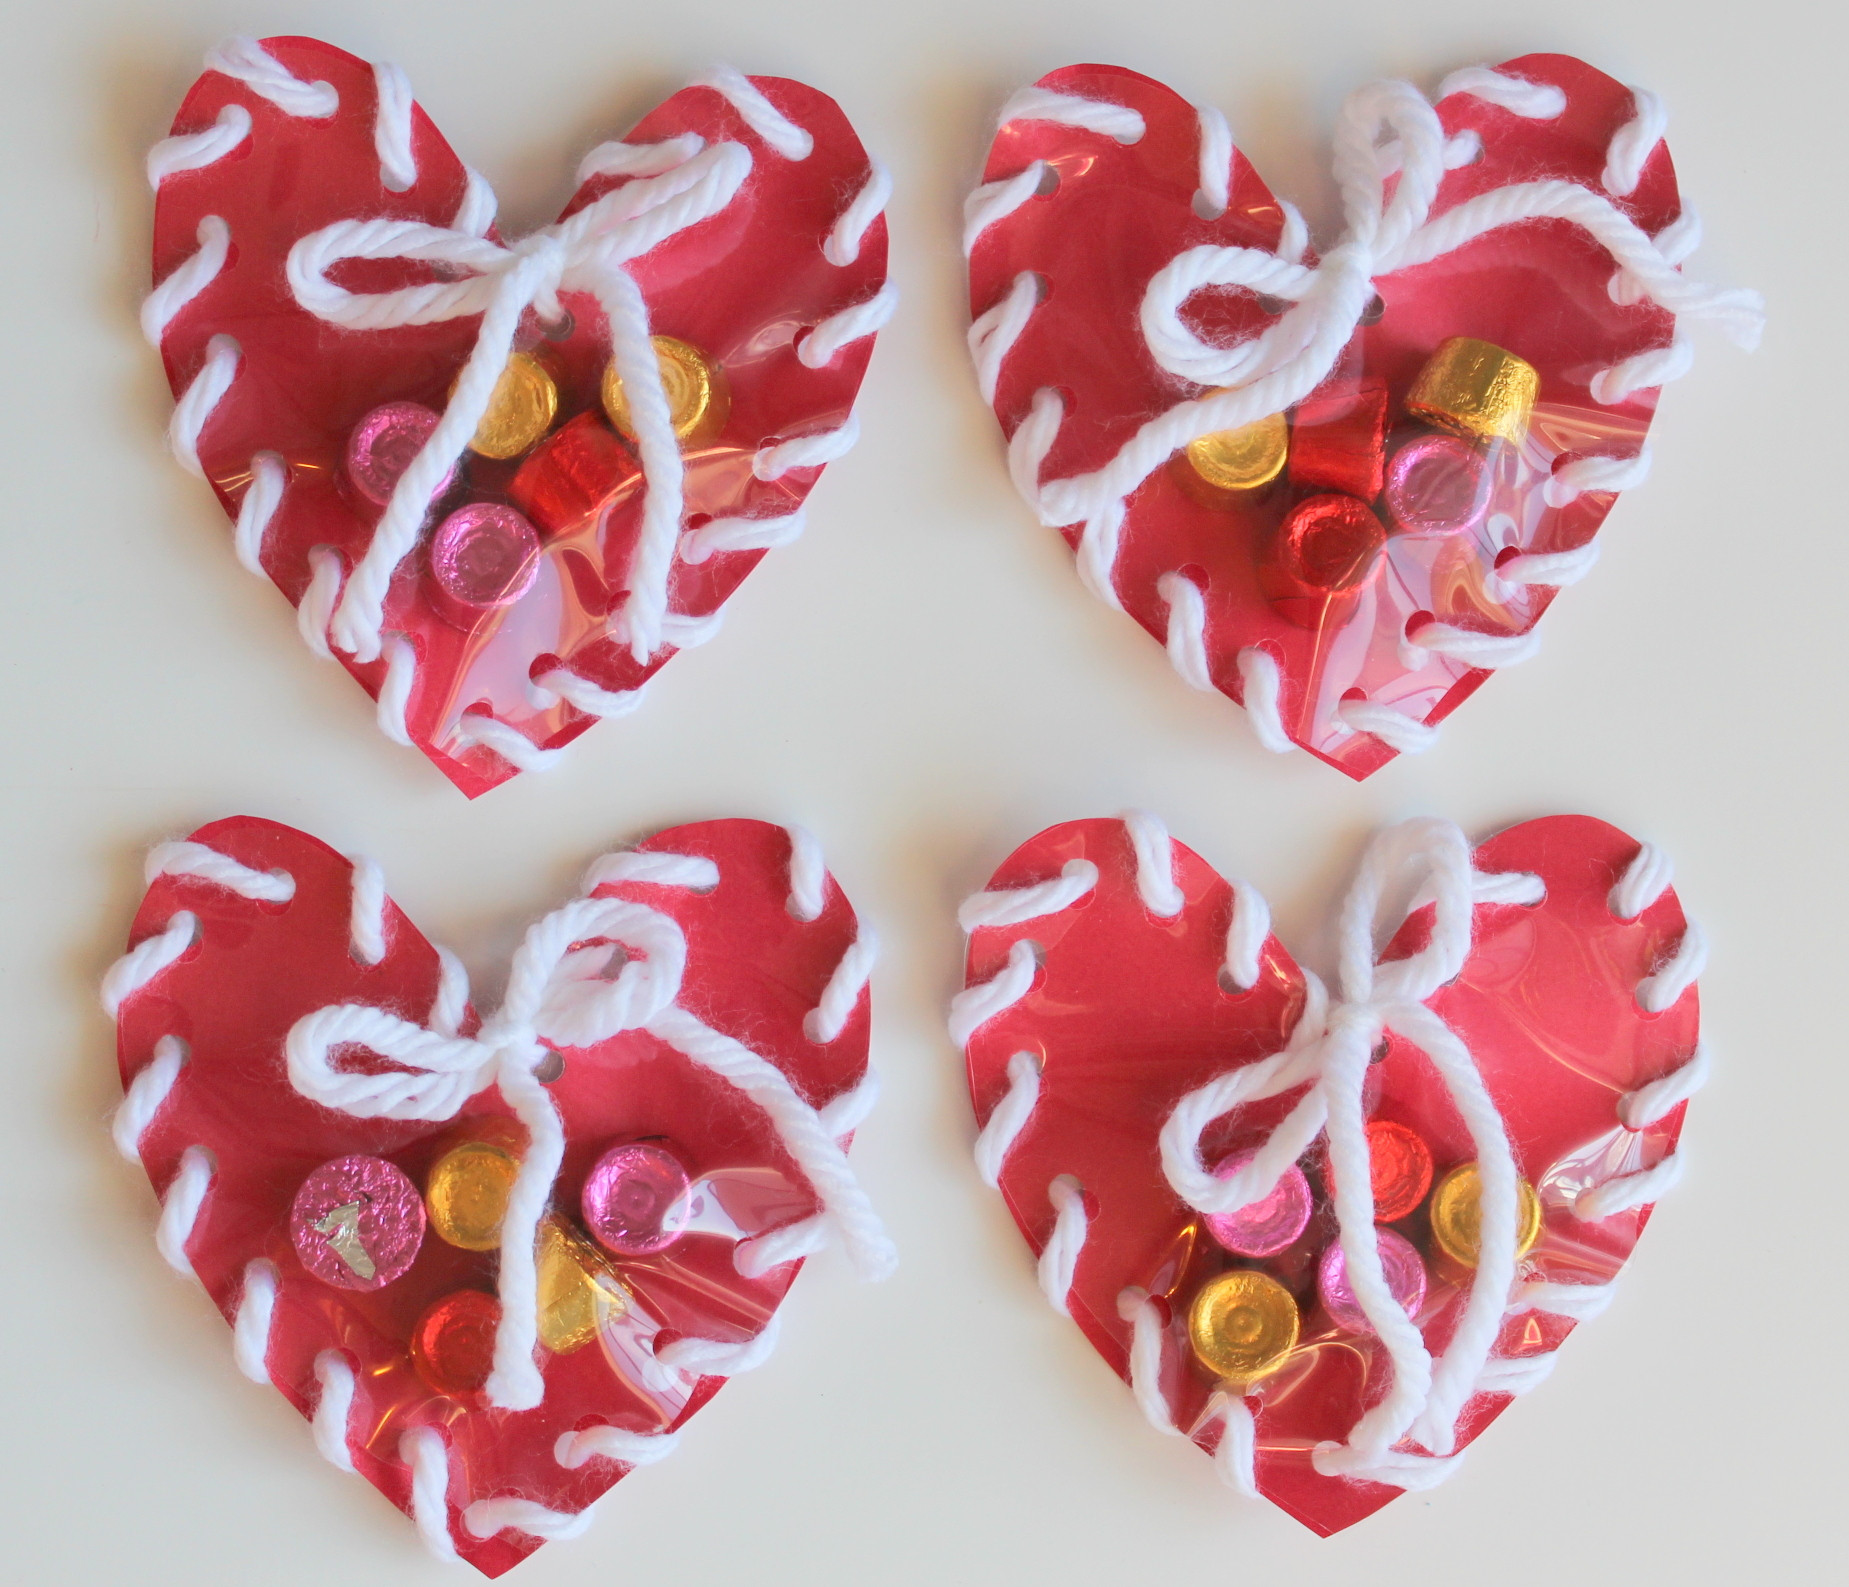 Valentine Arts And Crafts For Kids
 Lollydot Hand Sewn Paper Heart Valentine Craft for Kids